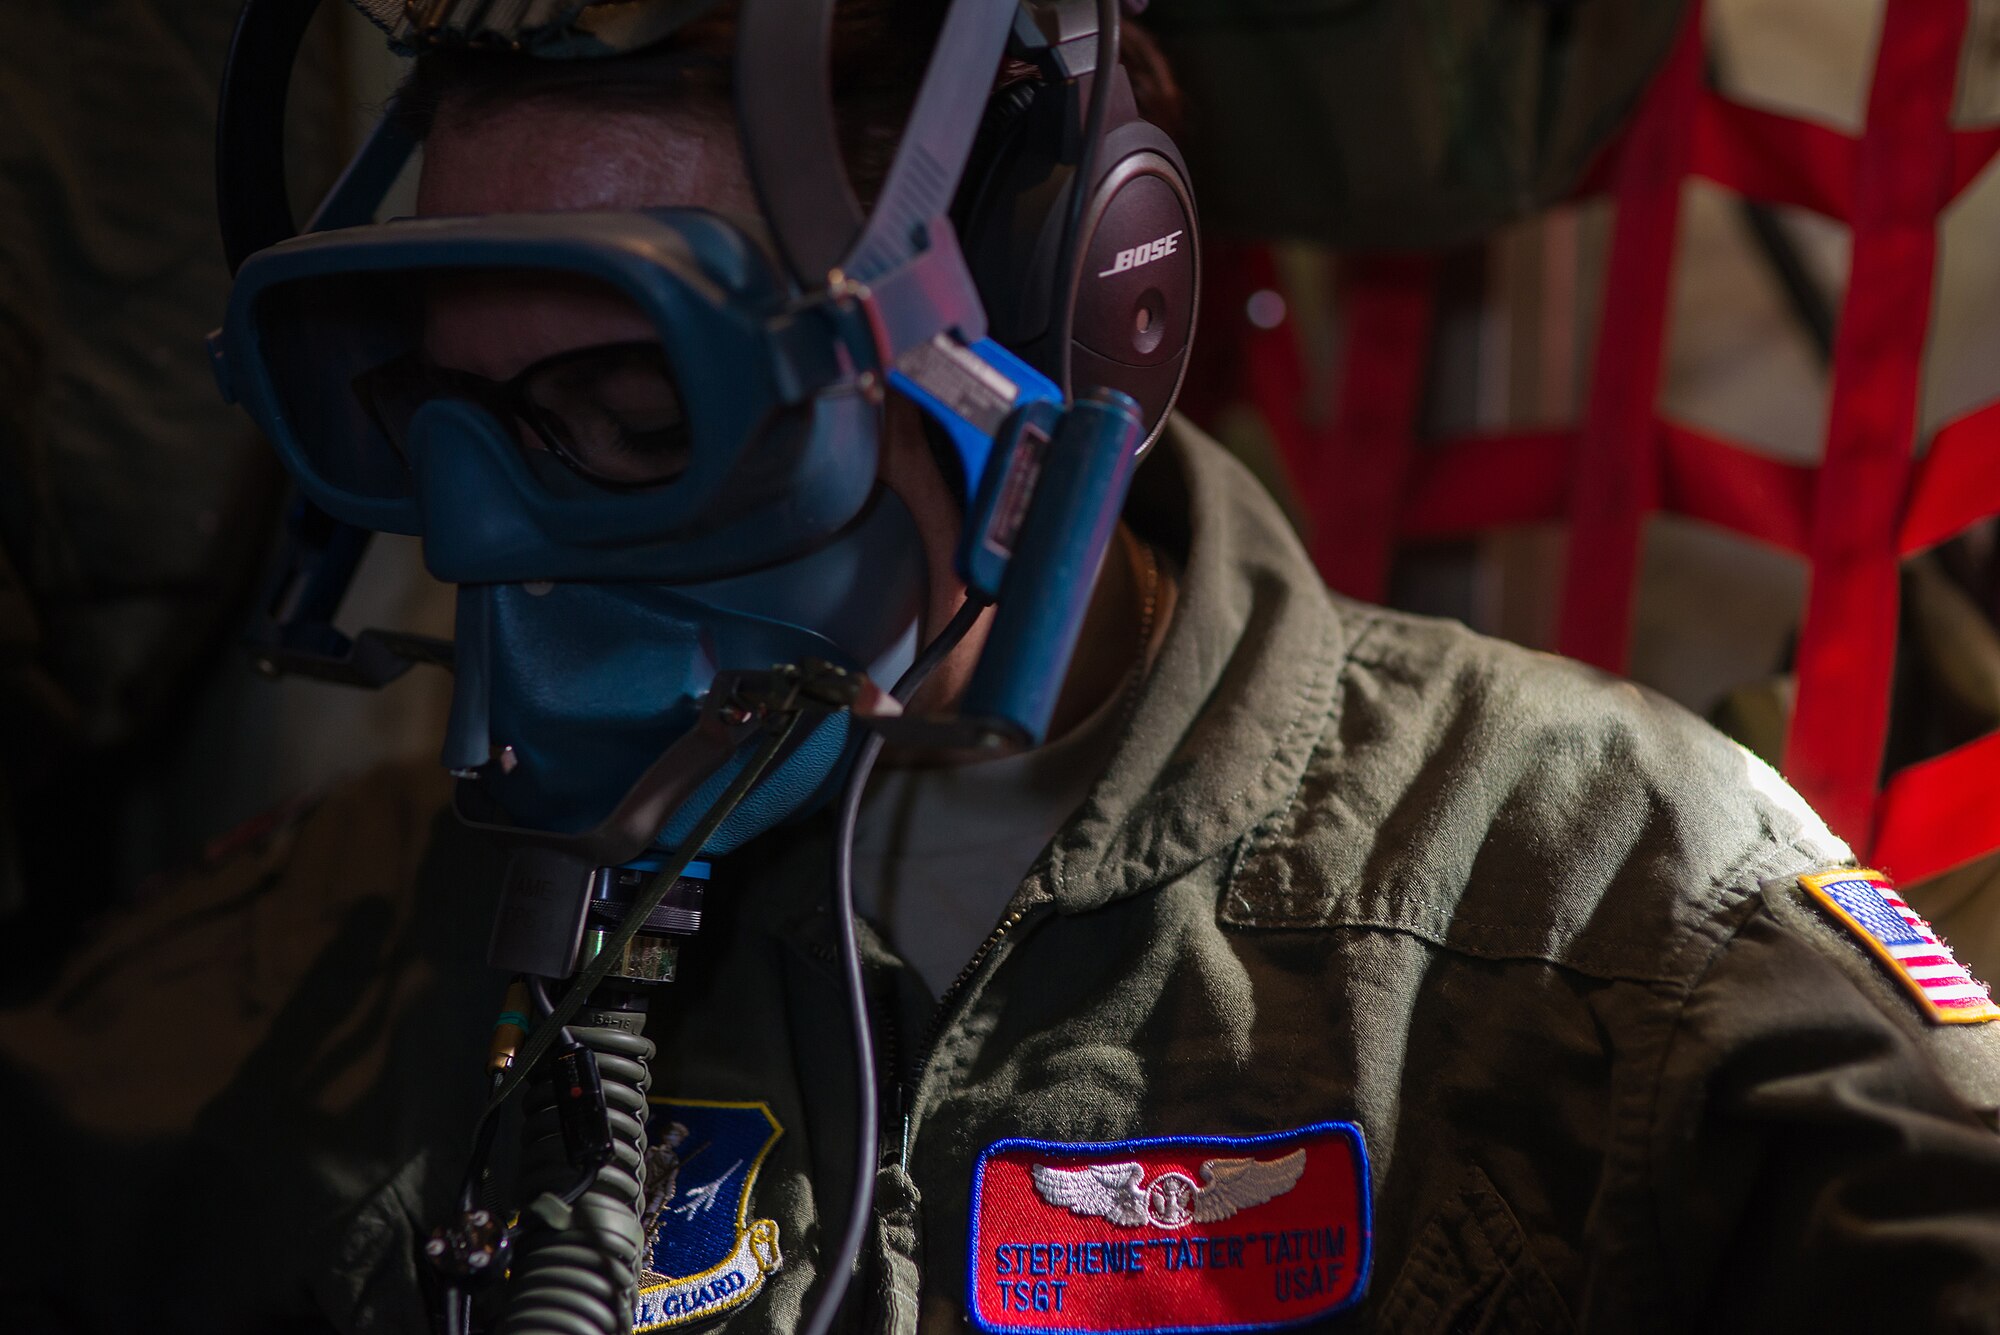 Tech. Sgt. Stephenie Tatum, 137th Aeromedical Evacuation Squadron medical technician, tests her oxygen mask during a simulated rapid decompression on a C-130 Hercules flown by the 130th Airlift Wing, West Virginia ANG, as part of a joint ANG training mission, Sep. 12, 2015. The training helped 137 AES Airmen experience different airframes and new flight crews while maintaining flight readiness. (U.S. Air National Guard photo by Senior Airman Tyler Woodward/Released)